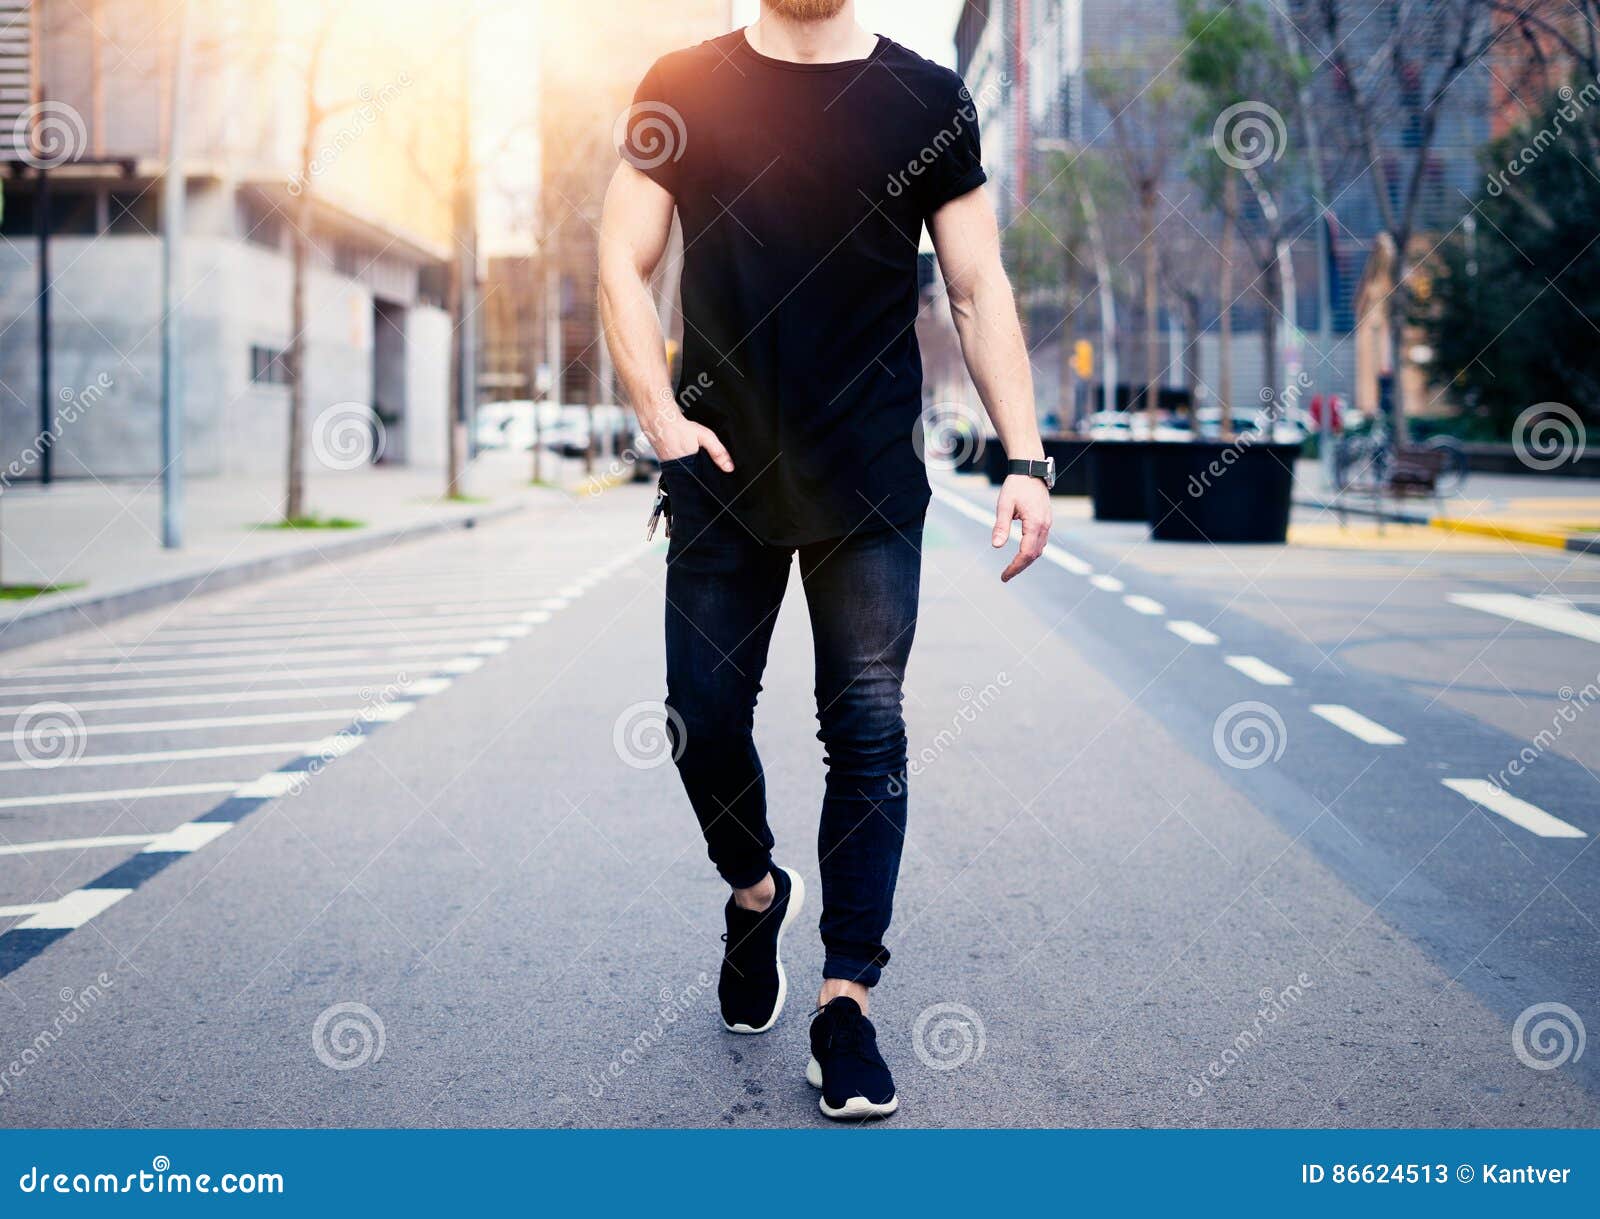 young muscular man wearing black tshirt and jeans walking on the streets of the modern city. blurred background